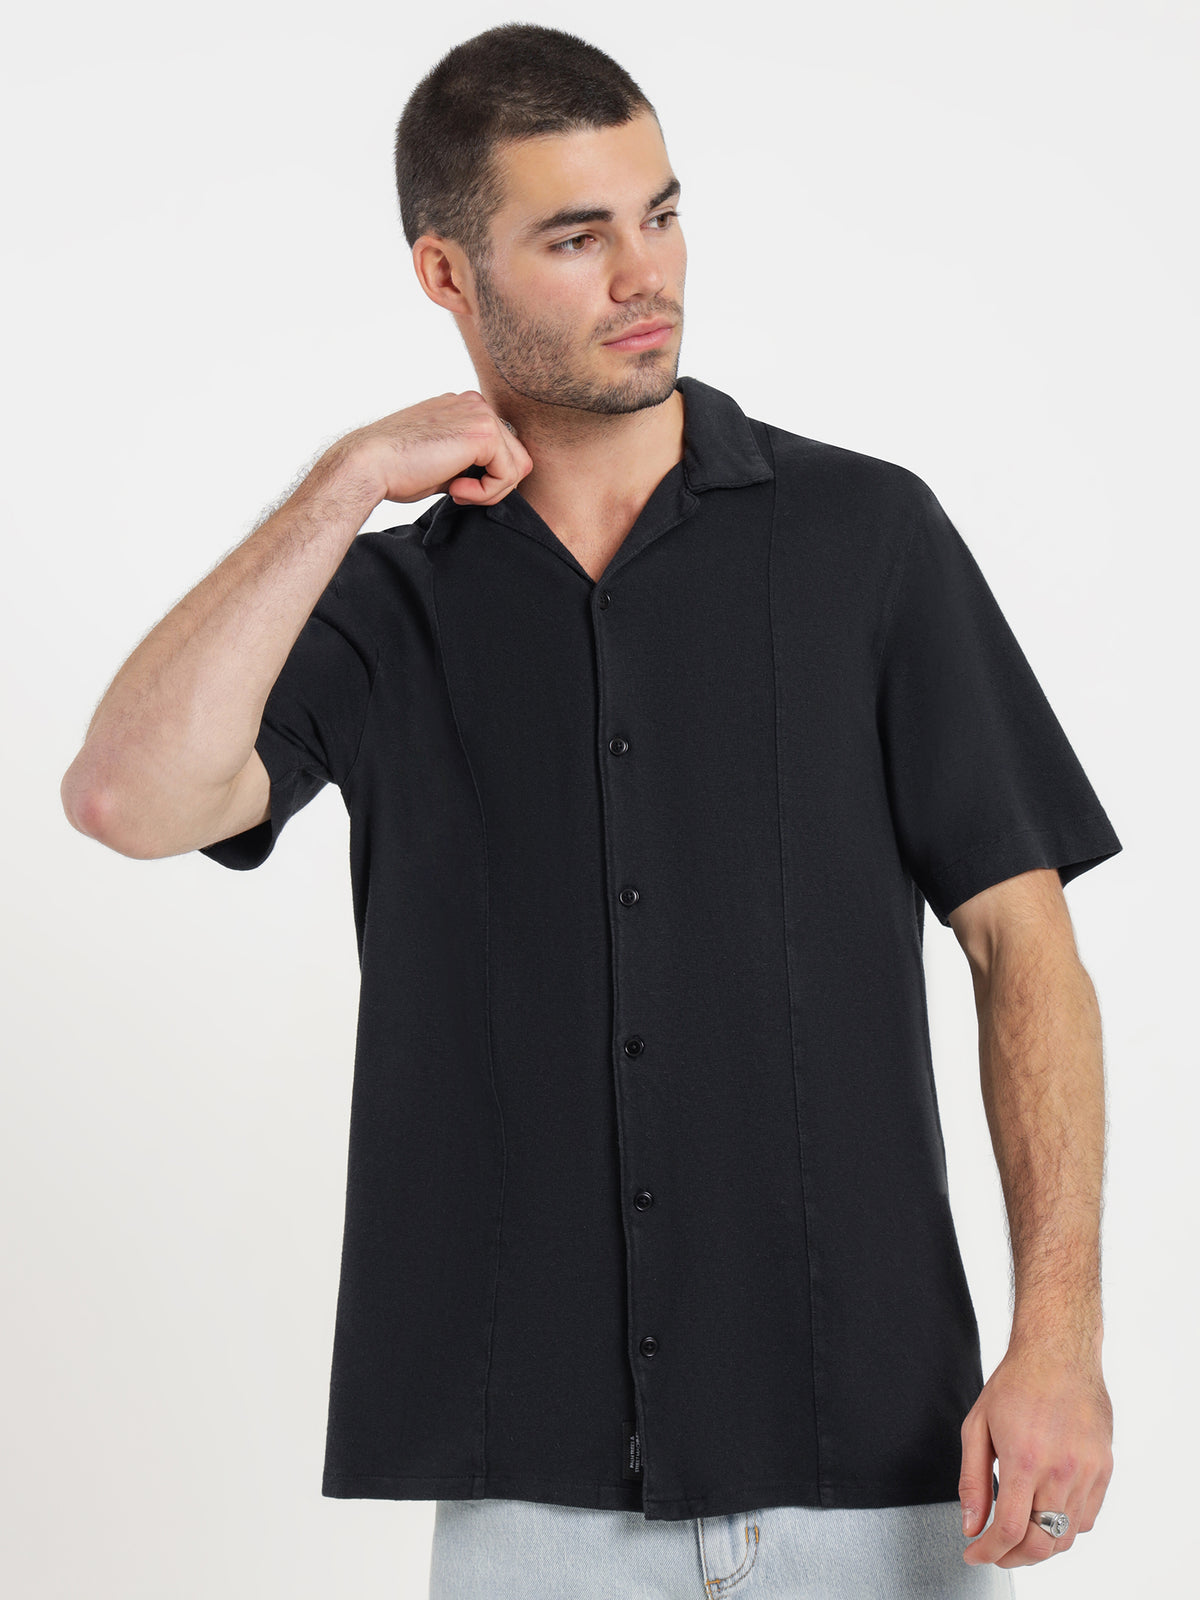 Hemp Some Kind of Paradise Bowling Shirt in Black